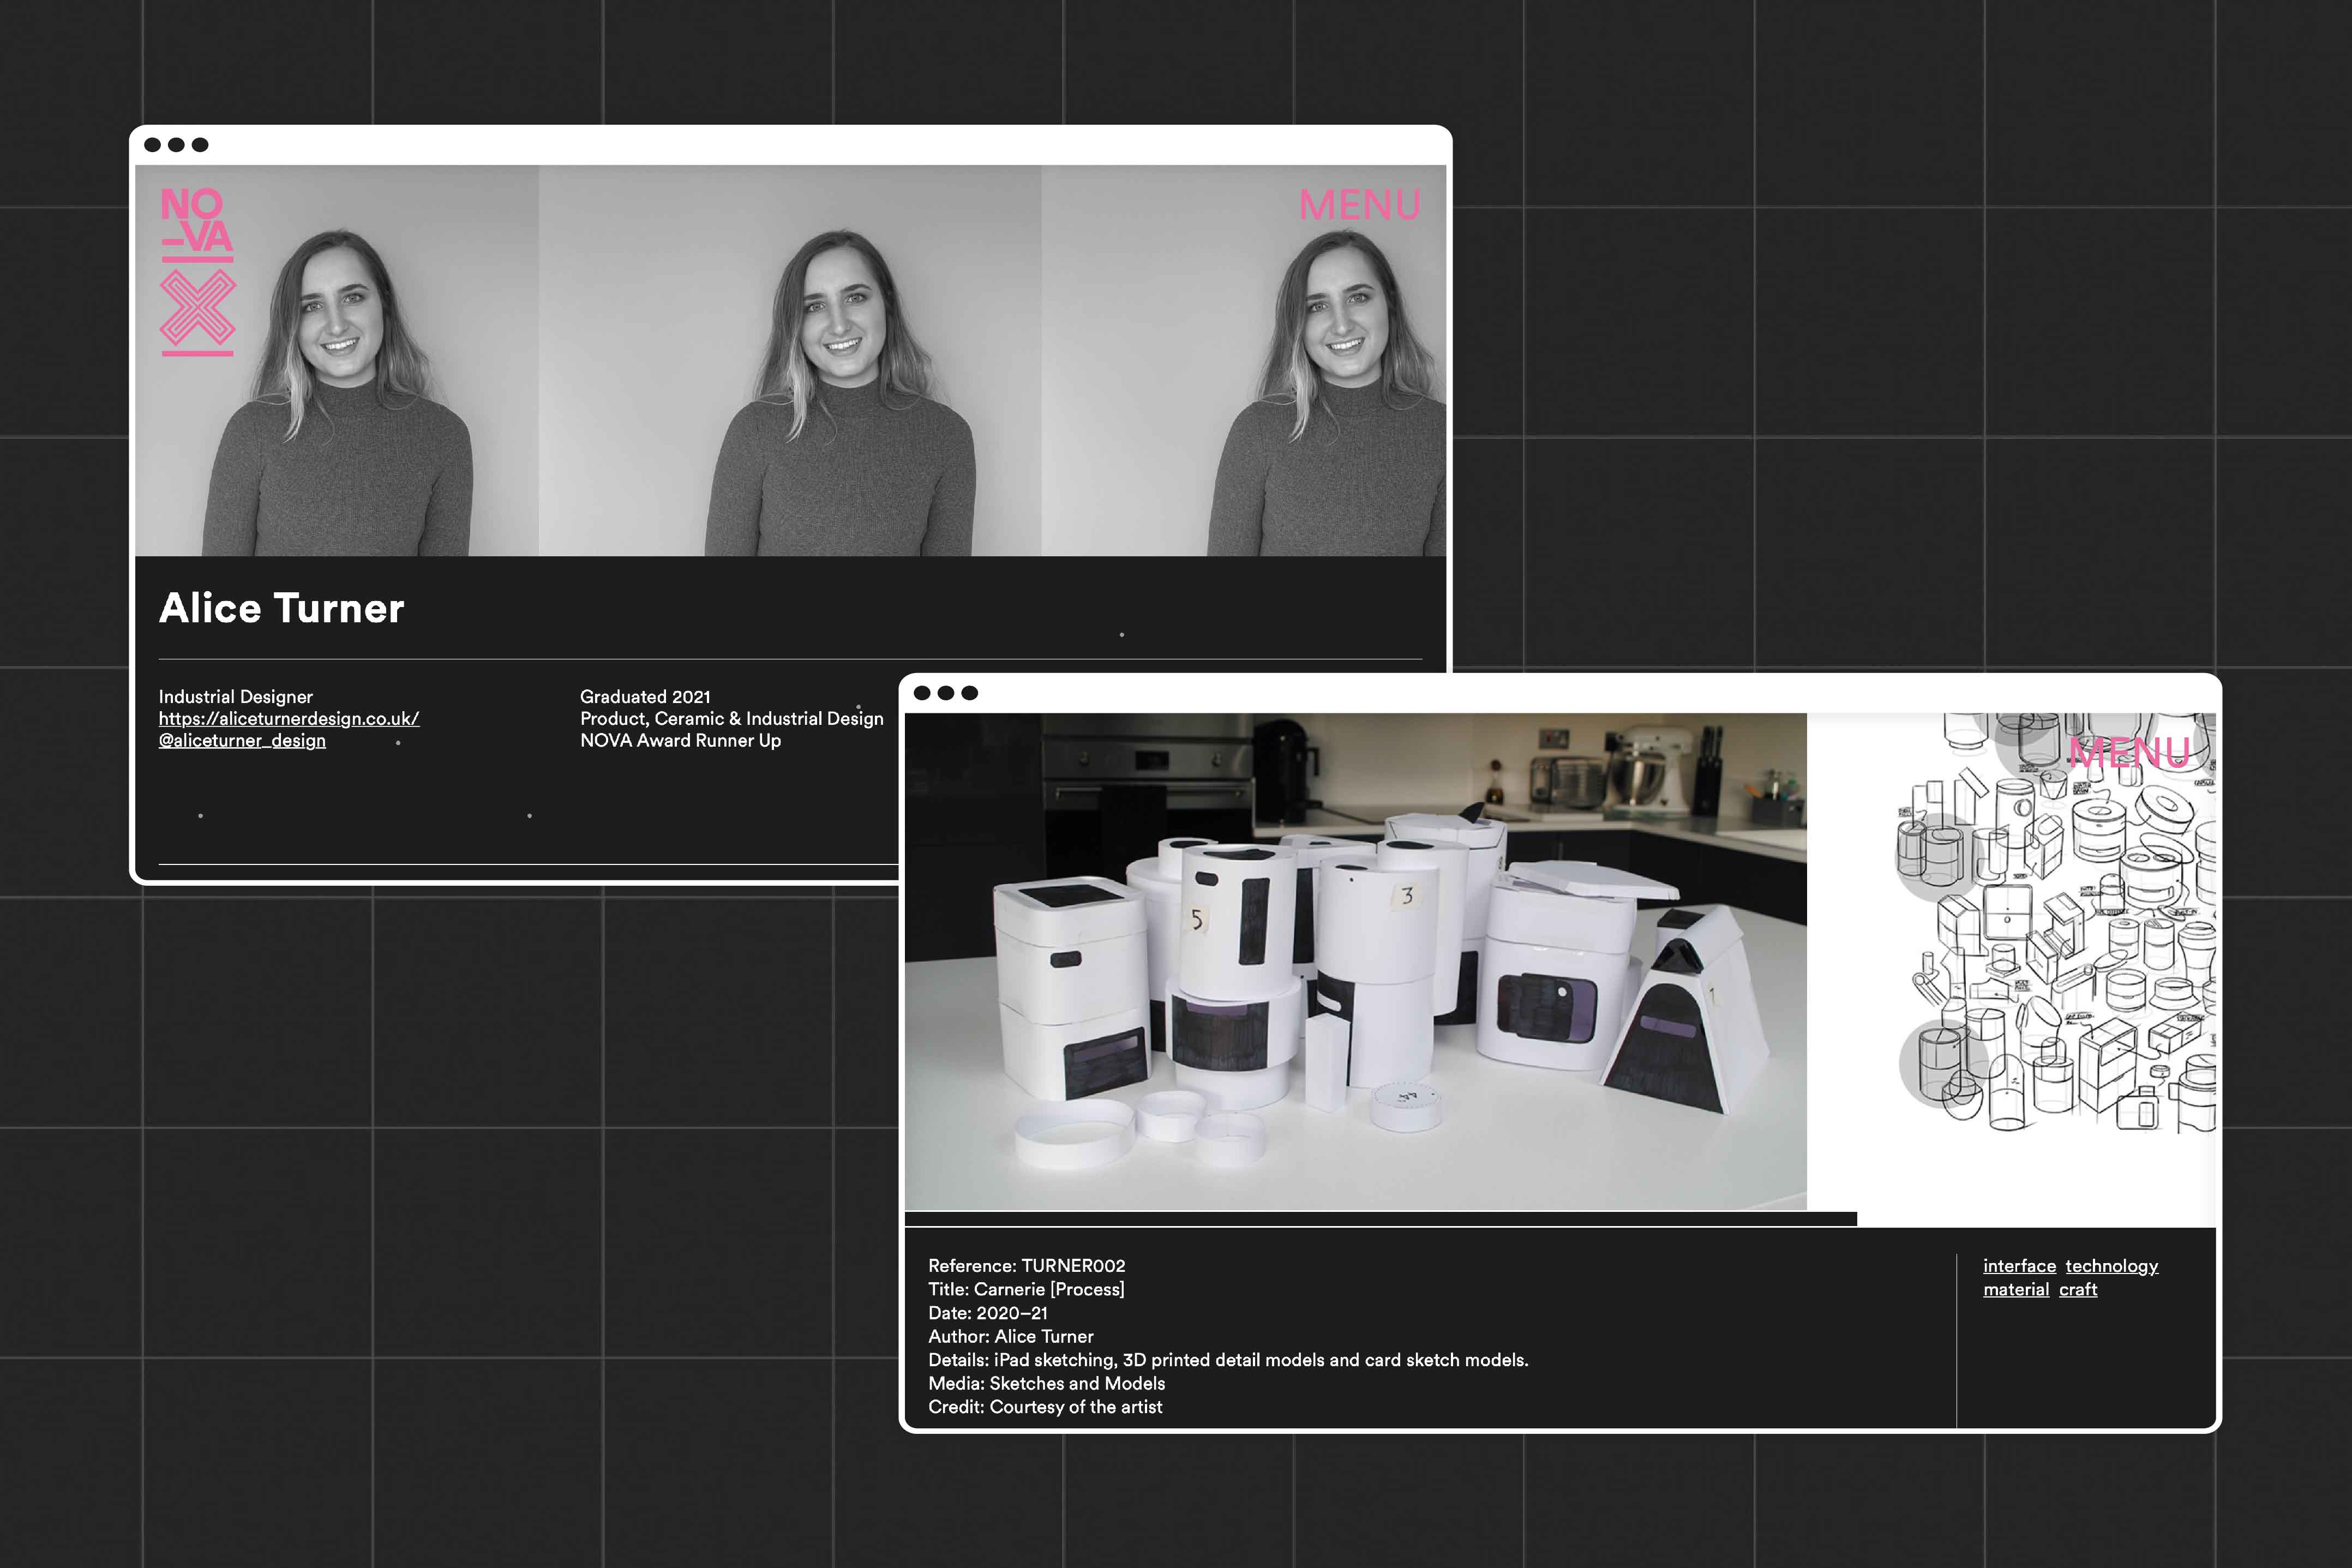 Images of the Nova-X website showing a student page, with the work of the student who had won a Nova award. The second image shows the students work with information about the details of the work and how it was produced.